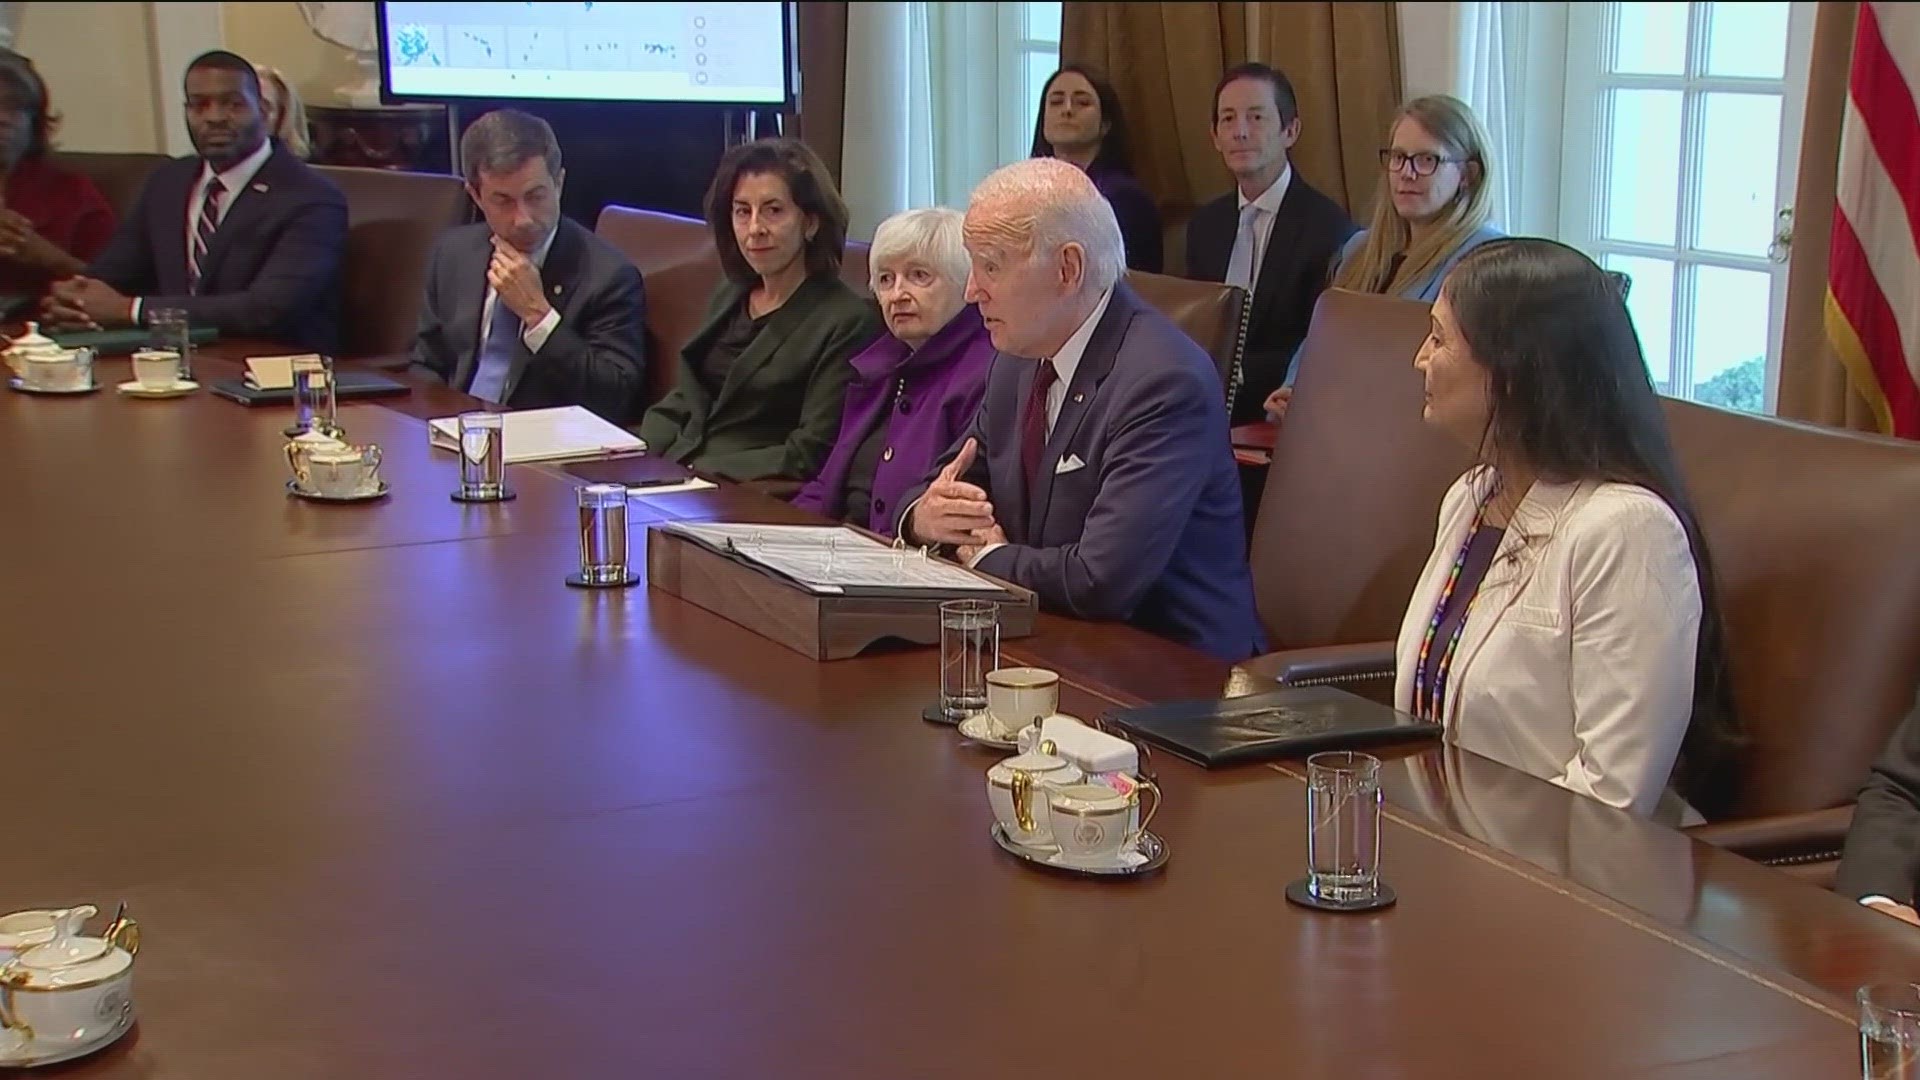 Treasury Secretary Janet Yellen highlighted the administration's effort with their economic policy.